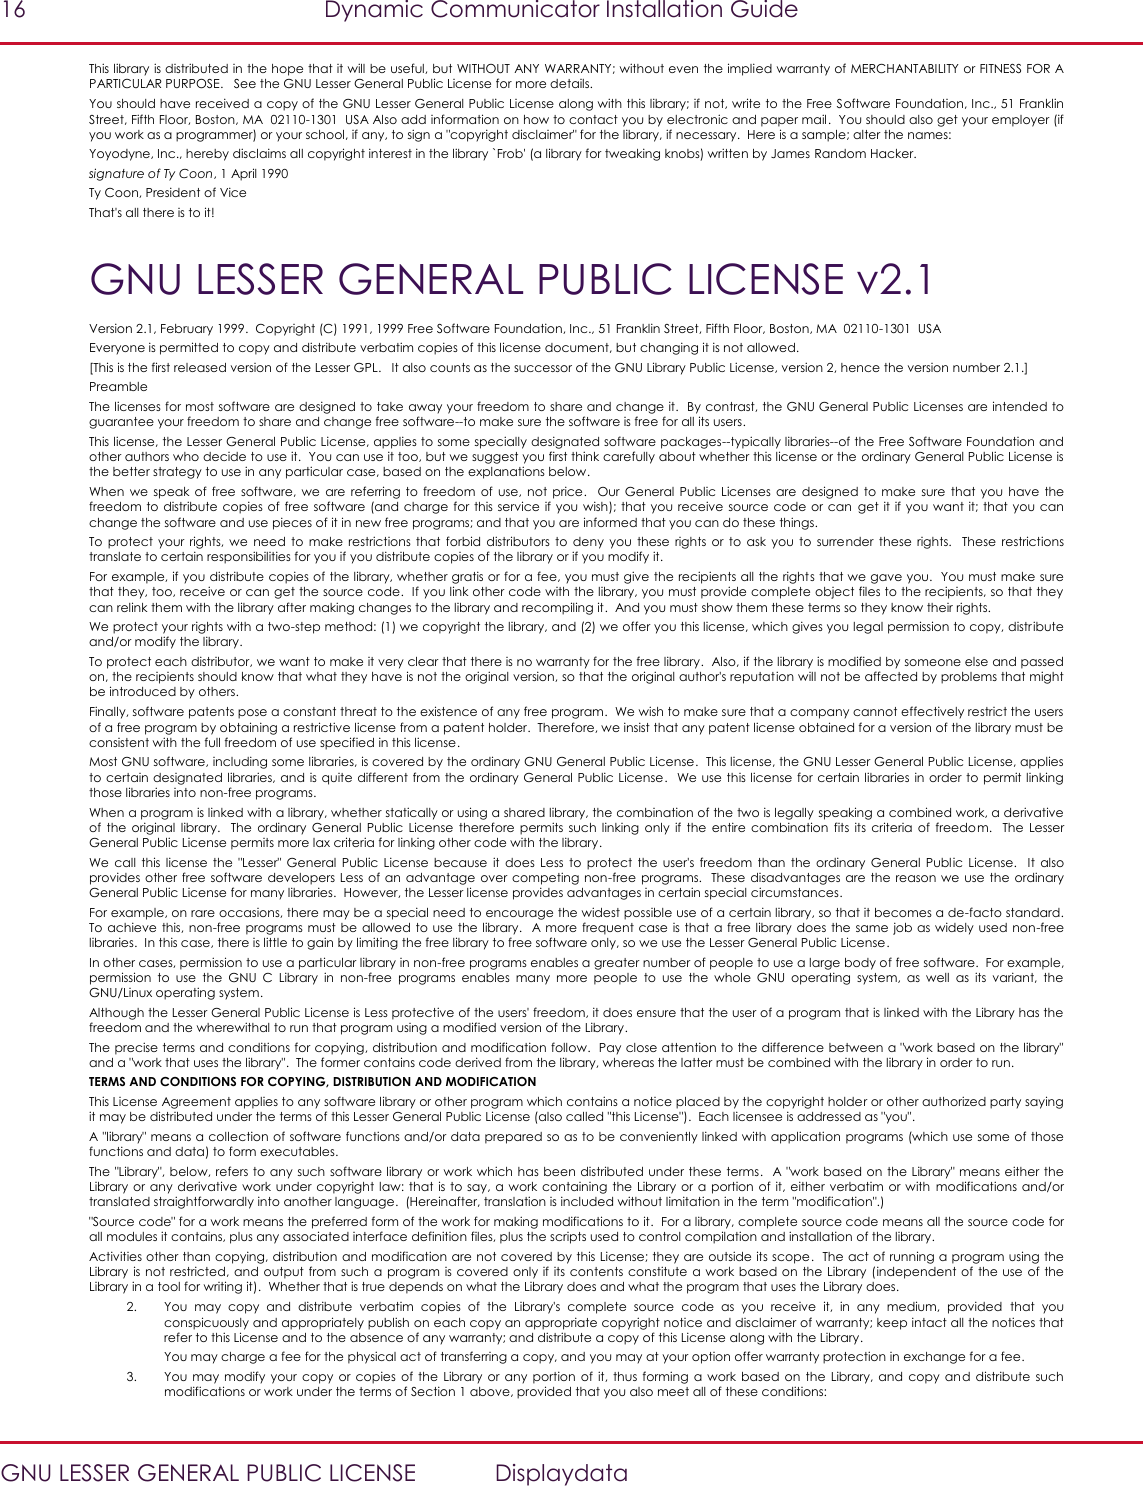 16  Dynamic Communicator Installation Guide   GNU LESSER GENERAL PUBLIC LICENSE  Displaydata This library is distributed in the hope that it will be useful, but WITHOUT ANY WARRANTY; without even the implied warranty of MERCHANTABILITY or FITNESS FOR A PARTICULAR PURPOSE.   See the GNU Lesser General Public License for more details. You should have received a copy of the GNU Lesser General Public License along with this library; if not, write to the Free Software Foundation, Inc., 51 Franklin Street, Fifth Floor, Boston, MA  02110-1301  USA Also add information on how to contact you by electronic and paper mail.  You should also get your employer (if you work as a programmer) or your school, if any, to sign a &quot;copyright disclaimer&quot; for the library, if necessary.  Here is a sample; alter the names:  Yoyodyne, Inc., hereby disclaims all copyright interest in the library `Frob&apos; (a library for tweaking knobs) written by James Random Hacker. signature of Ty Coon, 1 April 1990 Ty Coon, President of Vice That&apos;s all there is to it! GNU LESSER GENERAL PUBLIC LICENSE v2.1 Version 2.1, February 1999.  Copyright (C) 1991, 1999 Free Software Foundation, Inc., 51 Franklin Street, Fifth Floor, Boston, MA  02110-1301  USA Everyone is permitted to copy and distribute verbatim copies of this license document, but changing it is not allowed. [This is the first released version of the Lesser GPL.   It also counts as the successor of the GNU Library Public License, version 2, hence the version number 2.1.] Preamble The licenses for most software are designed to take away your freedom to share and change it.  By contrast, the GNU General Public Licenses are intended to guarantee your freedom to share and change free software--to make sure the software is free for all its users.   This license, the Lesser General Public License, applies to some specially designated software packages--typically libraries--of the Free Software Foundation and other authors who decide to use it.  You can use it too, but we suggest you first think carefully about whether this license or the ordinary General Public License is the better strategy to use in any particular case, based on the explanations below.   When  we speak  of free  software, we  are referring  to freedom  of  use,  not price.    Our  General Public Licenses  are  designed  to  make  sure  that you  have the freedom  to distribute copies of free software (and charge for  this service if you  wish); that  you receive source code or  can  get it if you want  it; that you can change the software and use pieces of it in new free programs; and that you are informed that you can do these things.   To  protect your  rights, we  need  to  make  restrictions that  forbid  distributors  to  deny  you  these rights  or  to  ask you  to  surrender  these  rights.   These  restrictions translate to certain responsibilities for you if you distribute copies of the library or if you modify it.   For example, if you distribute copies of the library, whether gratis or for a fee, you must give the recipients all the rights that we gave you.  You must make sure that they, too, receive or can get the source code.  If you link other code with the library, you must provide complete object files to the recipients, so that they can relink them with the library after making changes to the library and recompiling it.  And you must show them these terms so they know their rights.   We protect your rights with a two-step method: (1) we copyright the library, and (2) we offer you this license, which gives you legal permission to copy, distribute and/or modify the library.   To protect each distributor, we want to make it very clear that there is no warranty for the free library.  Also, if the library is modified by someone else and passed on, the recipients should know that what they have is not the original version, so that the original author&apos;s reputation will not be affected by problems that might be introduced by others.   Finally, software patents pose a constant threat to the existence of any free program.  We wish to make sure that a company cannot effectively restrict the users of a free program by obtaining a restrictive license from a patent holder.  Therefore, we insist that any patent license obtained for a version of the library must be consistent with the full freedom of use specified in this license.   Most GNU software, including some libraries, is covered by the ordinary GNU General Public License.  This license, the GNU Lesser General Public License, applies to certain designated libraries, and is quite different from the ordinary General Public License.  We use this license for certain libraries  in order to permit linking those libraries into non-free programs.   When a program is linked with a library, whether statically or using a shared library, the combination of the two is legally speaking a combined work, a derivative of  the  original  library.   The  ordinary General  Public License  therefore  permits  such linking  only  if the  entire  combination  fits its  criteria of  freedom.   The  Lesser General Public License permits more lax criteria for linking other code with the library.   We  call  this  license  the  &quot;Lesser&quot;  General  Public License  because  it does  Less  to  protect  the  user&apos;s  freedom  than  the  ordinary  General  Public  License.    It  also provides other free  software developers Less of an  advantage over competing non-free  programs.  These  disadvantages are the  reason  we  use  the ordinary General Public License for many libraries.  However, the Lesser license provides advantages in certain special circumstances.   For example, on rare occasions, there may be a special need to encourage the widest possible use of a certain library, so that it becomes a de-facto standard.  To achieve this, non-free  programs must be  allowed  to use  the library.    A more  frequent case is that a free library does the same job as widely used non-free libraries.  In this case, there is little to gain by limiting the free library to free software only, so we use the Lesser General Public License.   In other cases, permission to use a particular library in non-free programs enables a greater number of people to use a large body of free software.  For example, permission  to  use  the  GNU  C  Library  in  non-free  programs  enables  many  more  people  to  use  the  whole  GNU  operating  system,  as  well  as  its  variant,  the GNU/Linux operating system.   Although the Lesser General Public License is Less protective of the users&apos; freedom, it does ensure that the user of a program that is linked with the Library has the freedom and the wherewithal to run that program using a modified version of the Library.   The precise terms and conditions for copying, distribution and modification follow.  Pay close attention to the difference between a &quot;work based on the library&quot; and a &quot;work that uses the library&quot;.  The former contains code derived from the library, whereas the latter must be combined with the library in order to run.   TERMS AND CONDITIONS FOR COPYING, DISTRIBUTION AND MODIFICATION This License Agreement applies to any software library or other program which contains a notice placed by the copyright holder or other authorized party saying it may be distributed under the terms of this Lesser General Public License (also called &quot;this License&quot;).  Each licensee is addressed as &quot;you&quot;.   A &quot;library&quot; means a collection of software functions and/or data prepared so as to be conveniently linked with application programs (which use some of those functions and data) to form executables.   The &quot;Library&quot;, below, refers to any such software library or work which has been distributed under these terms.   A &quot;work based on the Library&quot; means either the Library or  any derivative work under  copyright  law: that is to say, a work  containing the Library or a portion of  it, either  verbatim or with modifications and/or translated straightforwardly into another language.  (Hereinafter, translation is included without limitation in the term &quot;modification&quot;.)  &quot;Source code&quot; for a work means the preferred form of the work for making modifications to it.  For a library, complete source code means all the source code for all modules it contains, plus any associated interface definition files, plus the scripts used to control compilation and installation of the library.   Activities other than copying, distribution and modification are not covered by this License; they are outside its scope.  The act of running a program using the Library is not restricted, and output from  such a  program  is covered  only if its contents constitute a work  based on the Library (independent of the use of the Library in a tool for writing it).  Whether that is true depends on what the Library does and what the program that uses the Library does.   2. You  may  copy  and  distribute  verbatim  copies  of  the  Library&apos;s  complete  source  code  as  you  receive  it,  in  any  medium,  provided  that  you conspicuously and appropriately publish on each copy an appropriate copyright notice and disclaimer of warranty; keep intact all the notices that refer to this License and to the absence of any warranty; and distribute a copy of this License along with the Library.   You may charge a fee for the physical act of transferring a copy, and you may at your option offer warranty protection in exchange for a fee.   3. You may  modify your  copy or  copies  of  the  Library  or any  portion  of  it,  thus forming  a work  based on  the Library, and  copy and  distribute such modifications or work under the terms of Section 1 above, provided that you also meet all of these conditions:  